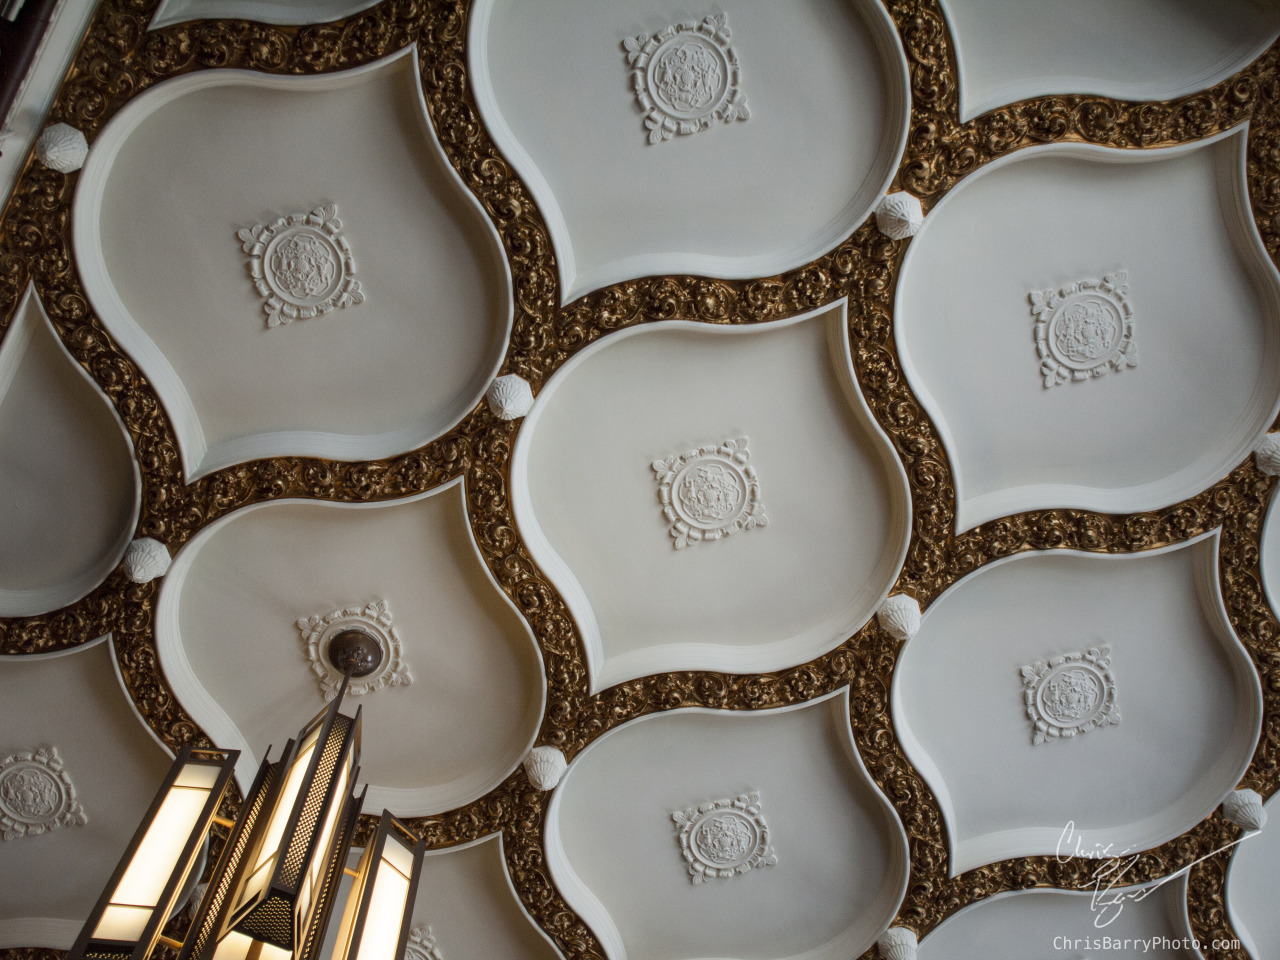 And finally, my favorite of the day, Linderman Ceiling (or Looking Up II)